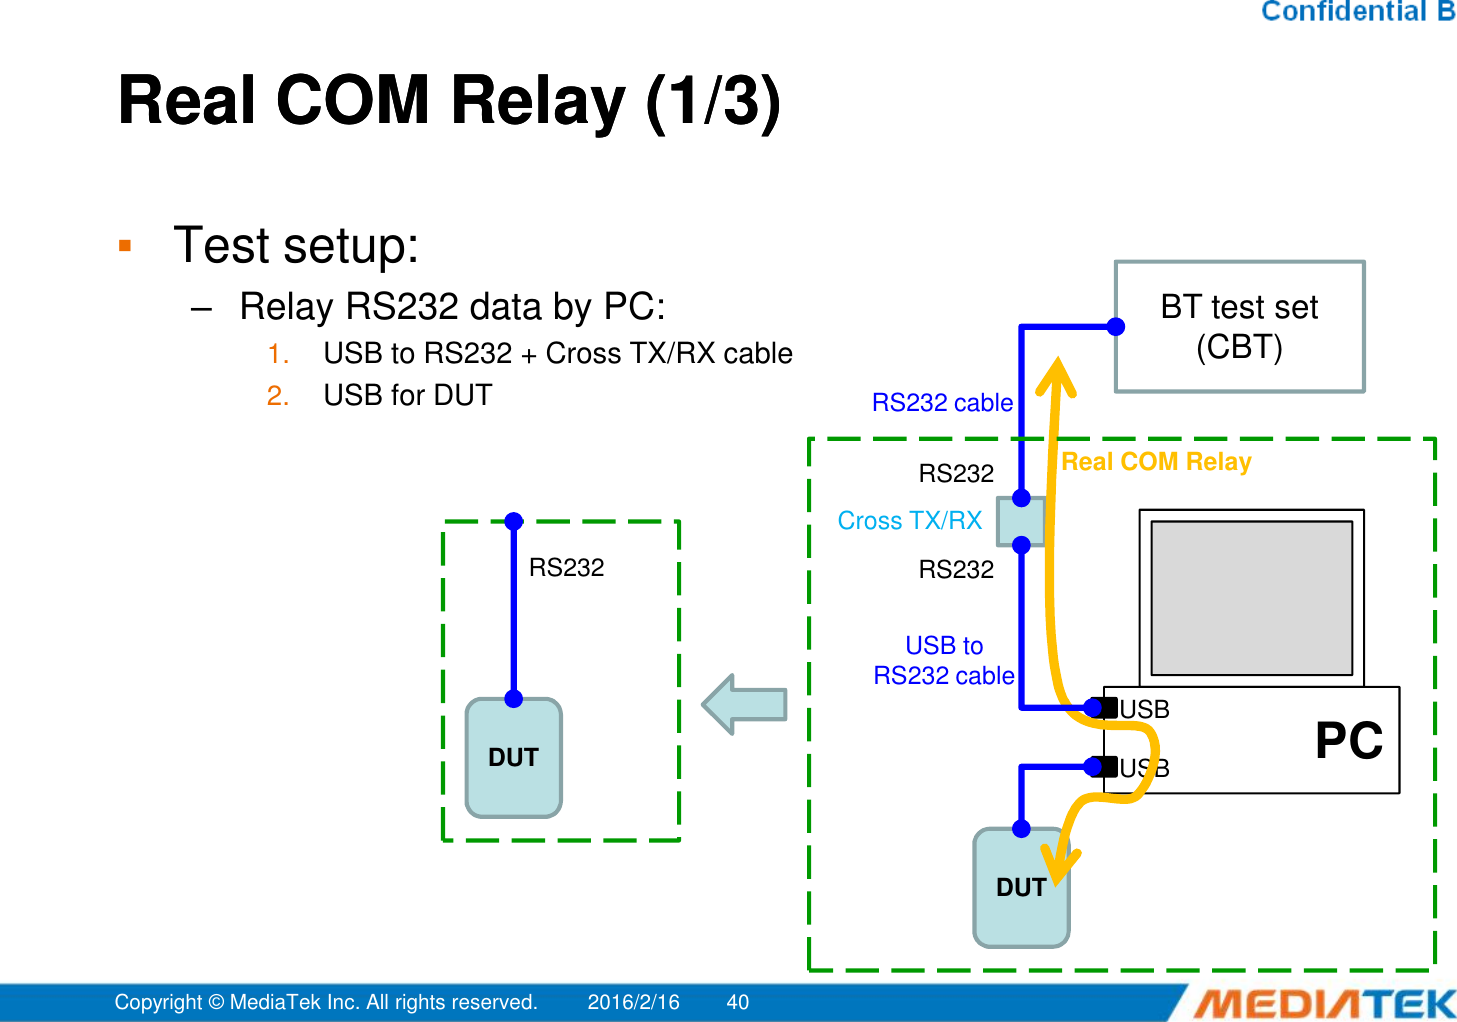 ▪Test setup:–Relay RS232 data by PC:1. USB to RS232 + Cross TX/RX cable2. USB for DUTReal COM Relay (1/3)Real COM Relay (1/3)BT test set(CBT)Real COM RelayRS232Cross TX/RXRS232 cable2016/2/16Copyright © MediaTek Inc. All rights reserved. 40PCUSBUSBDUTUSB to RS232 cableRS232Cross TX/RXDUTRS232